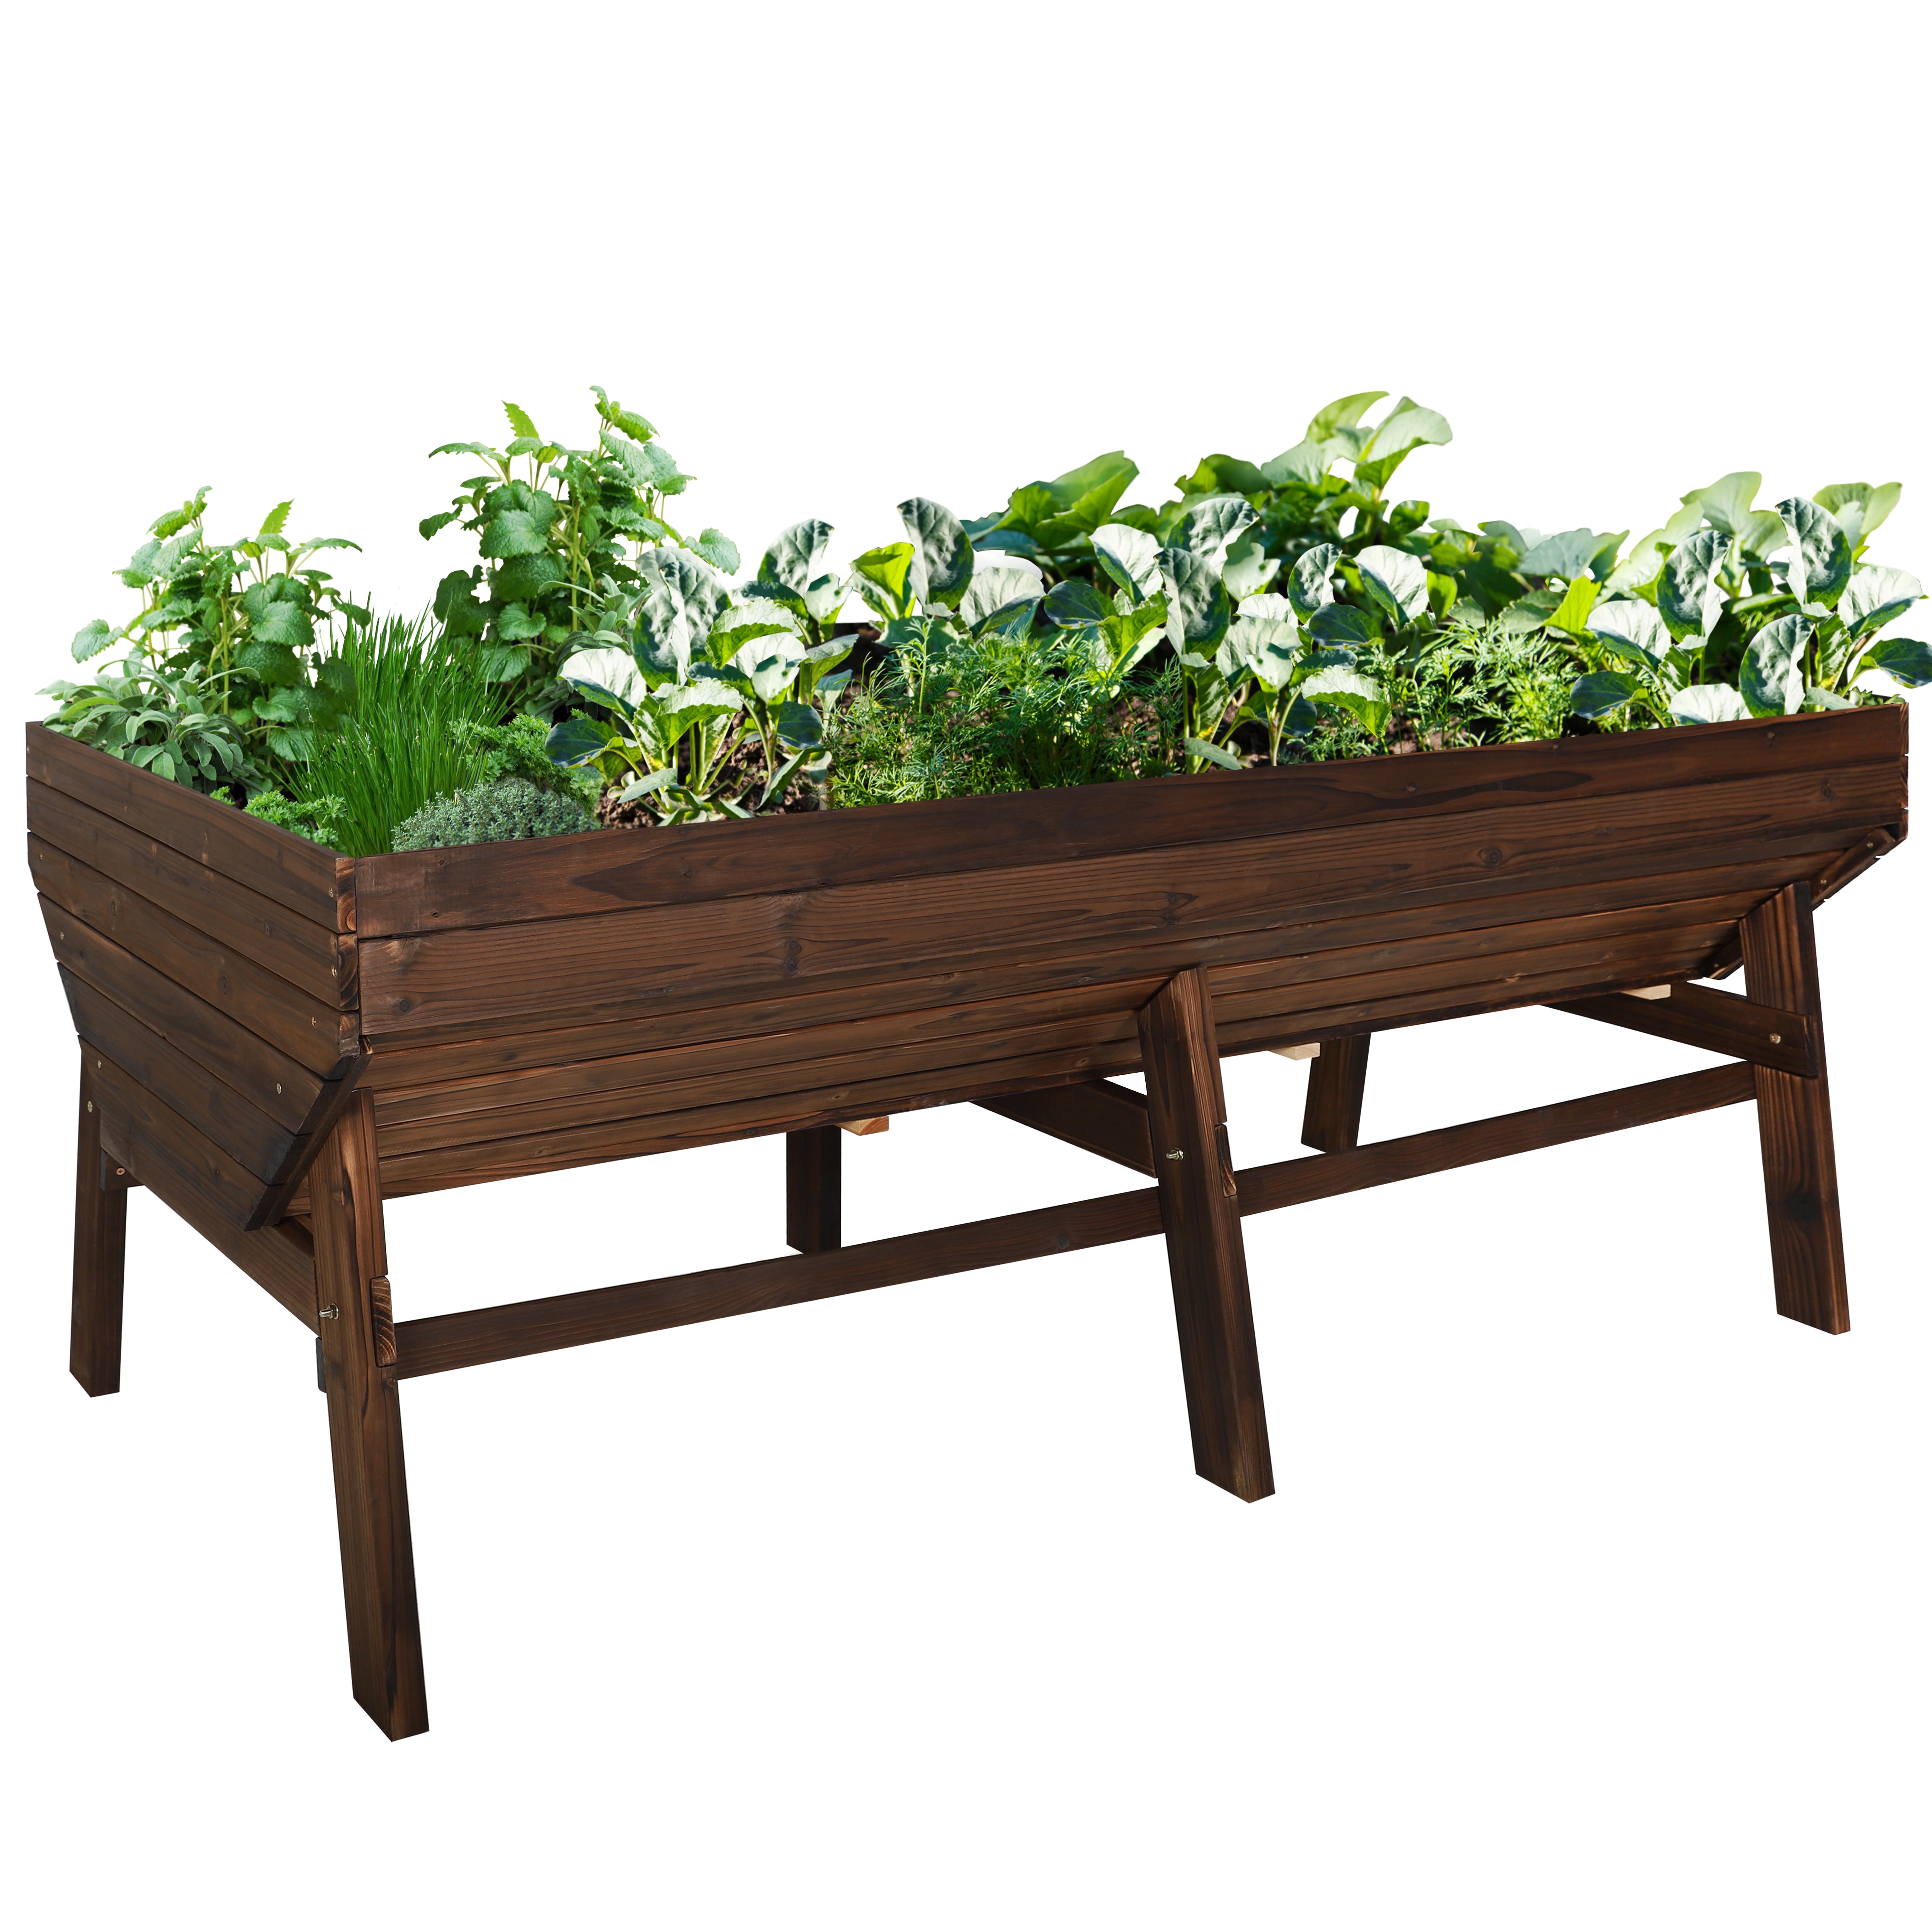 VEIKOUS Oversized Raised Bed Planter Box with V-Shaped Design Herbs and Vegetables, Rustic Walmart.com